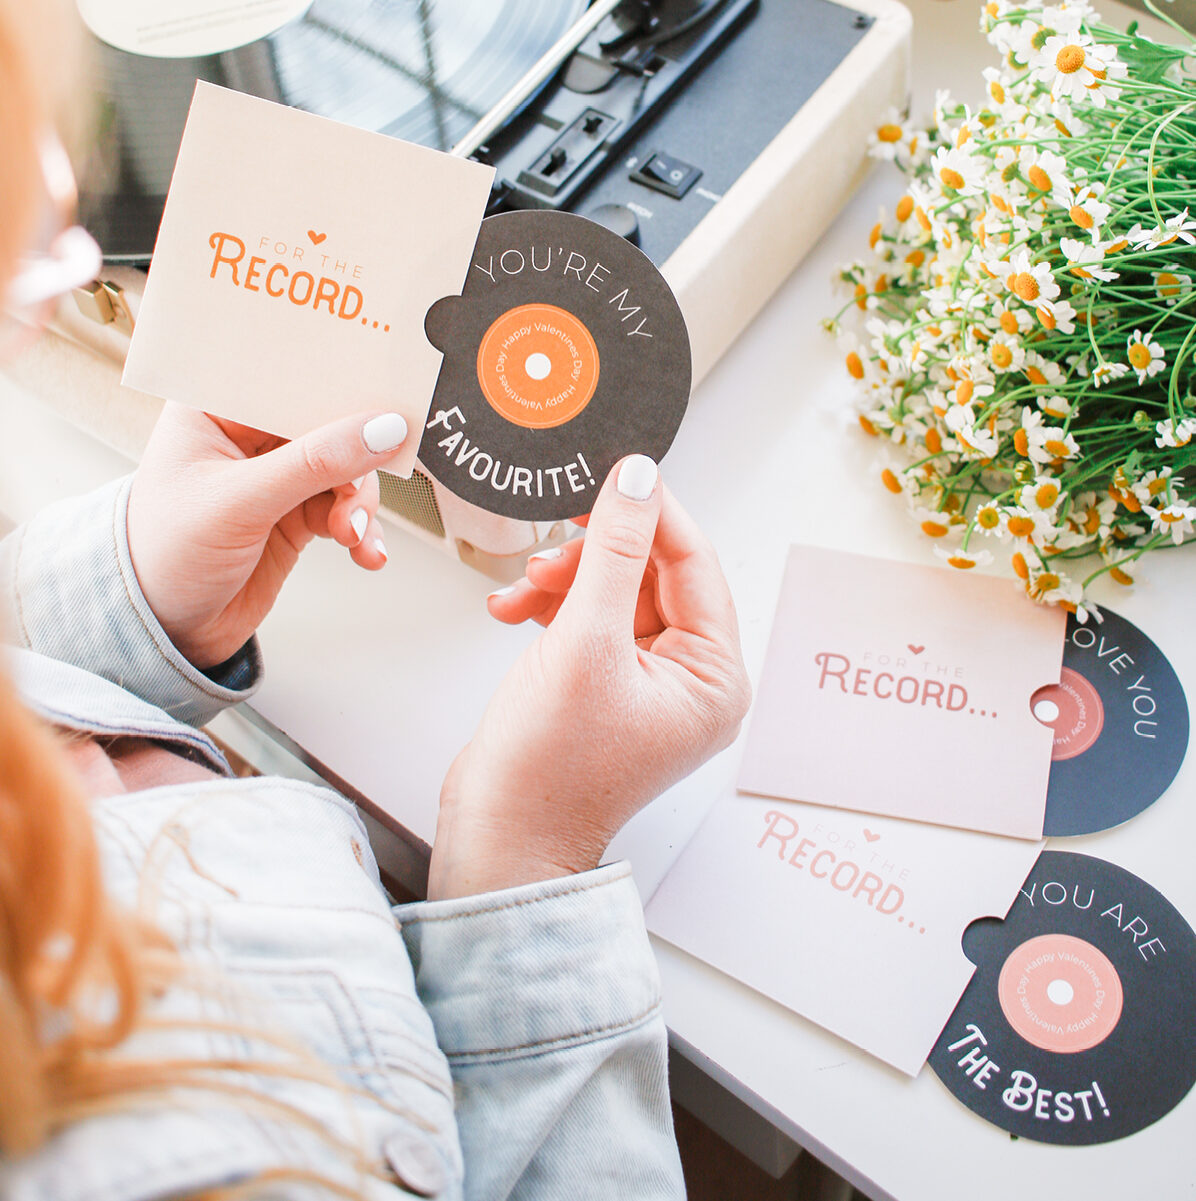 15 Creative DIY gifts for her: diy record shaped card